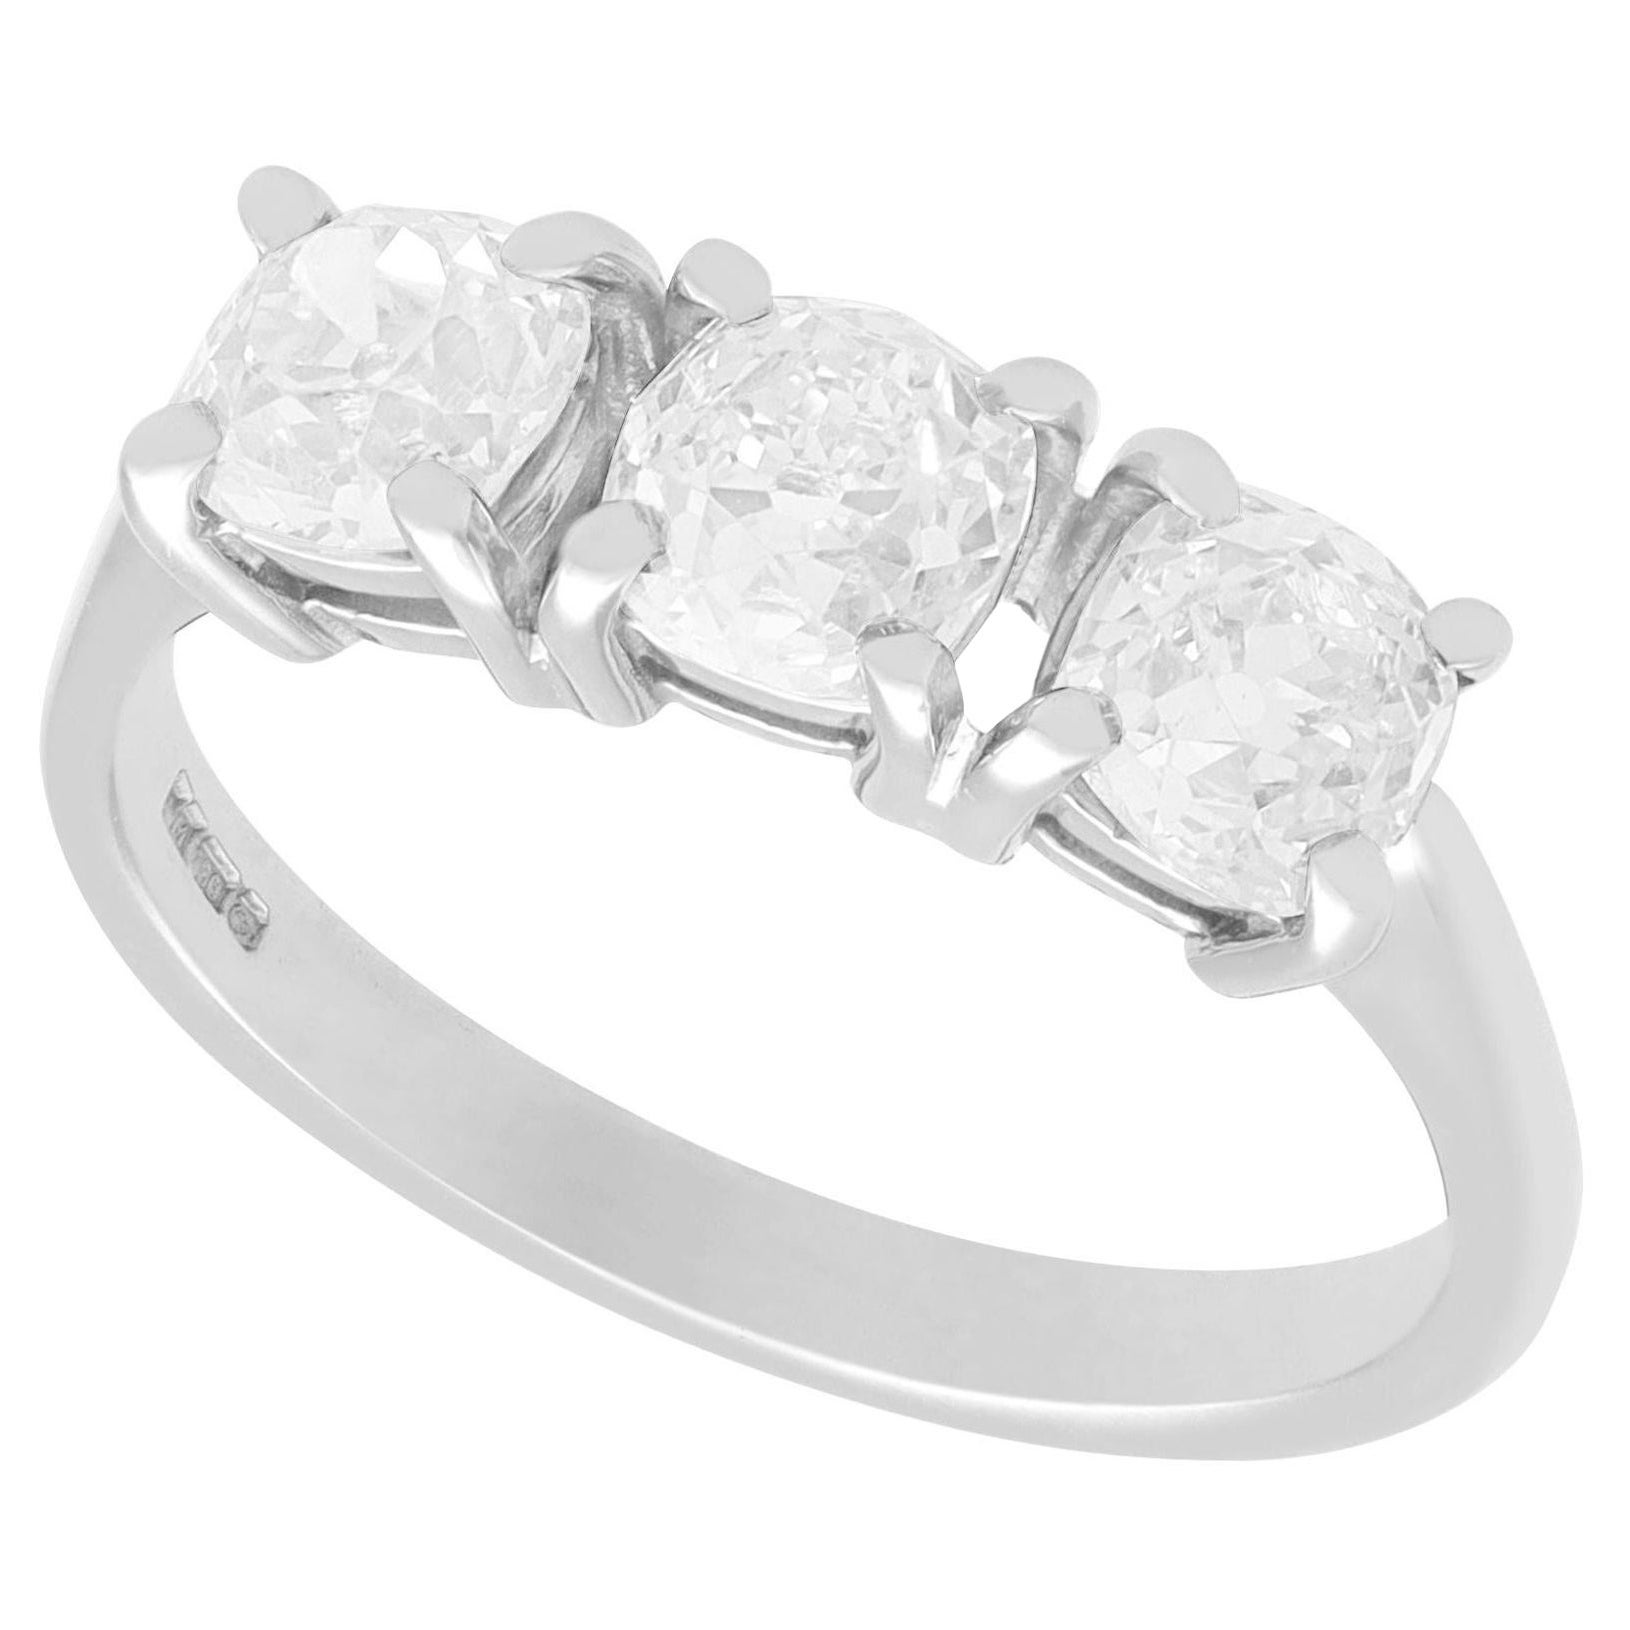 Antique and Contemporary 1.73 Carat Diamond and 18k White Gold Trilogy Ring For Sale